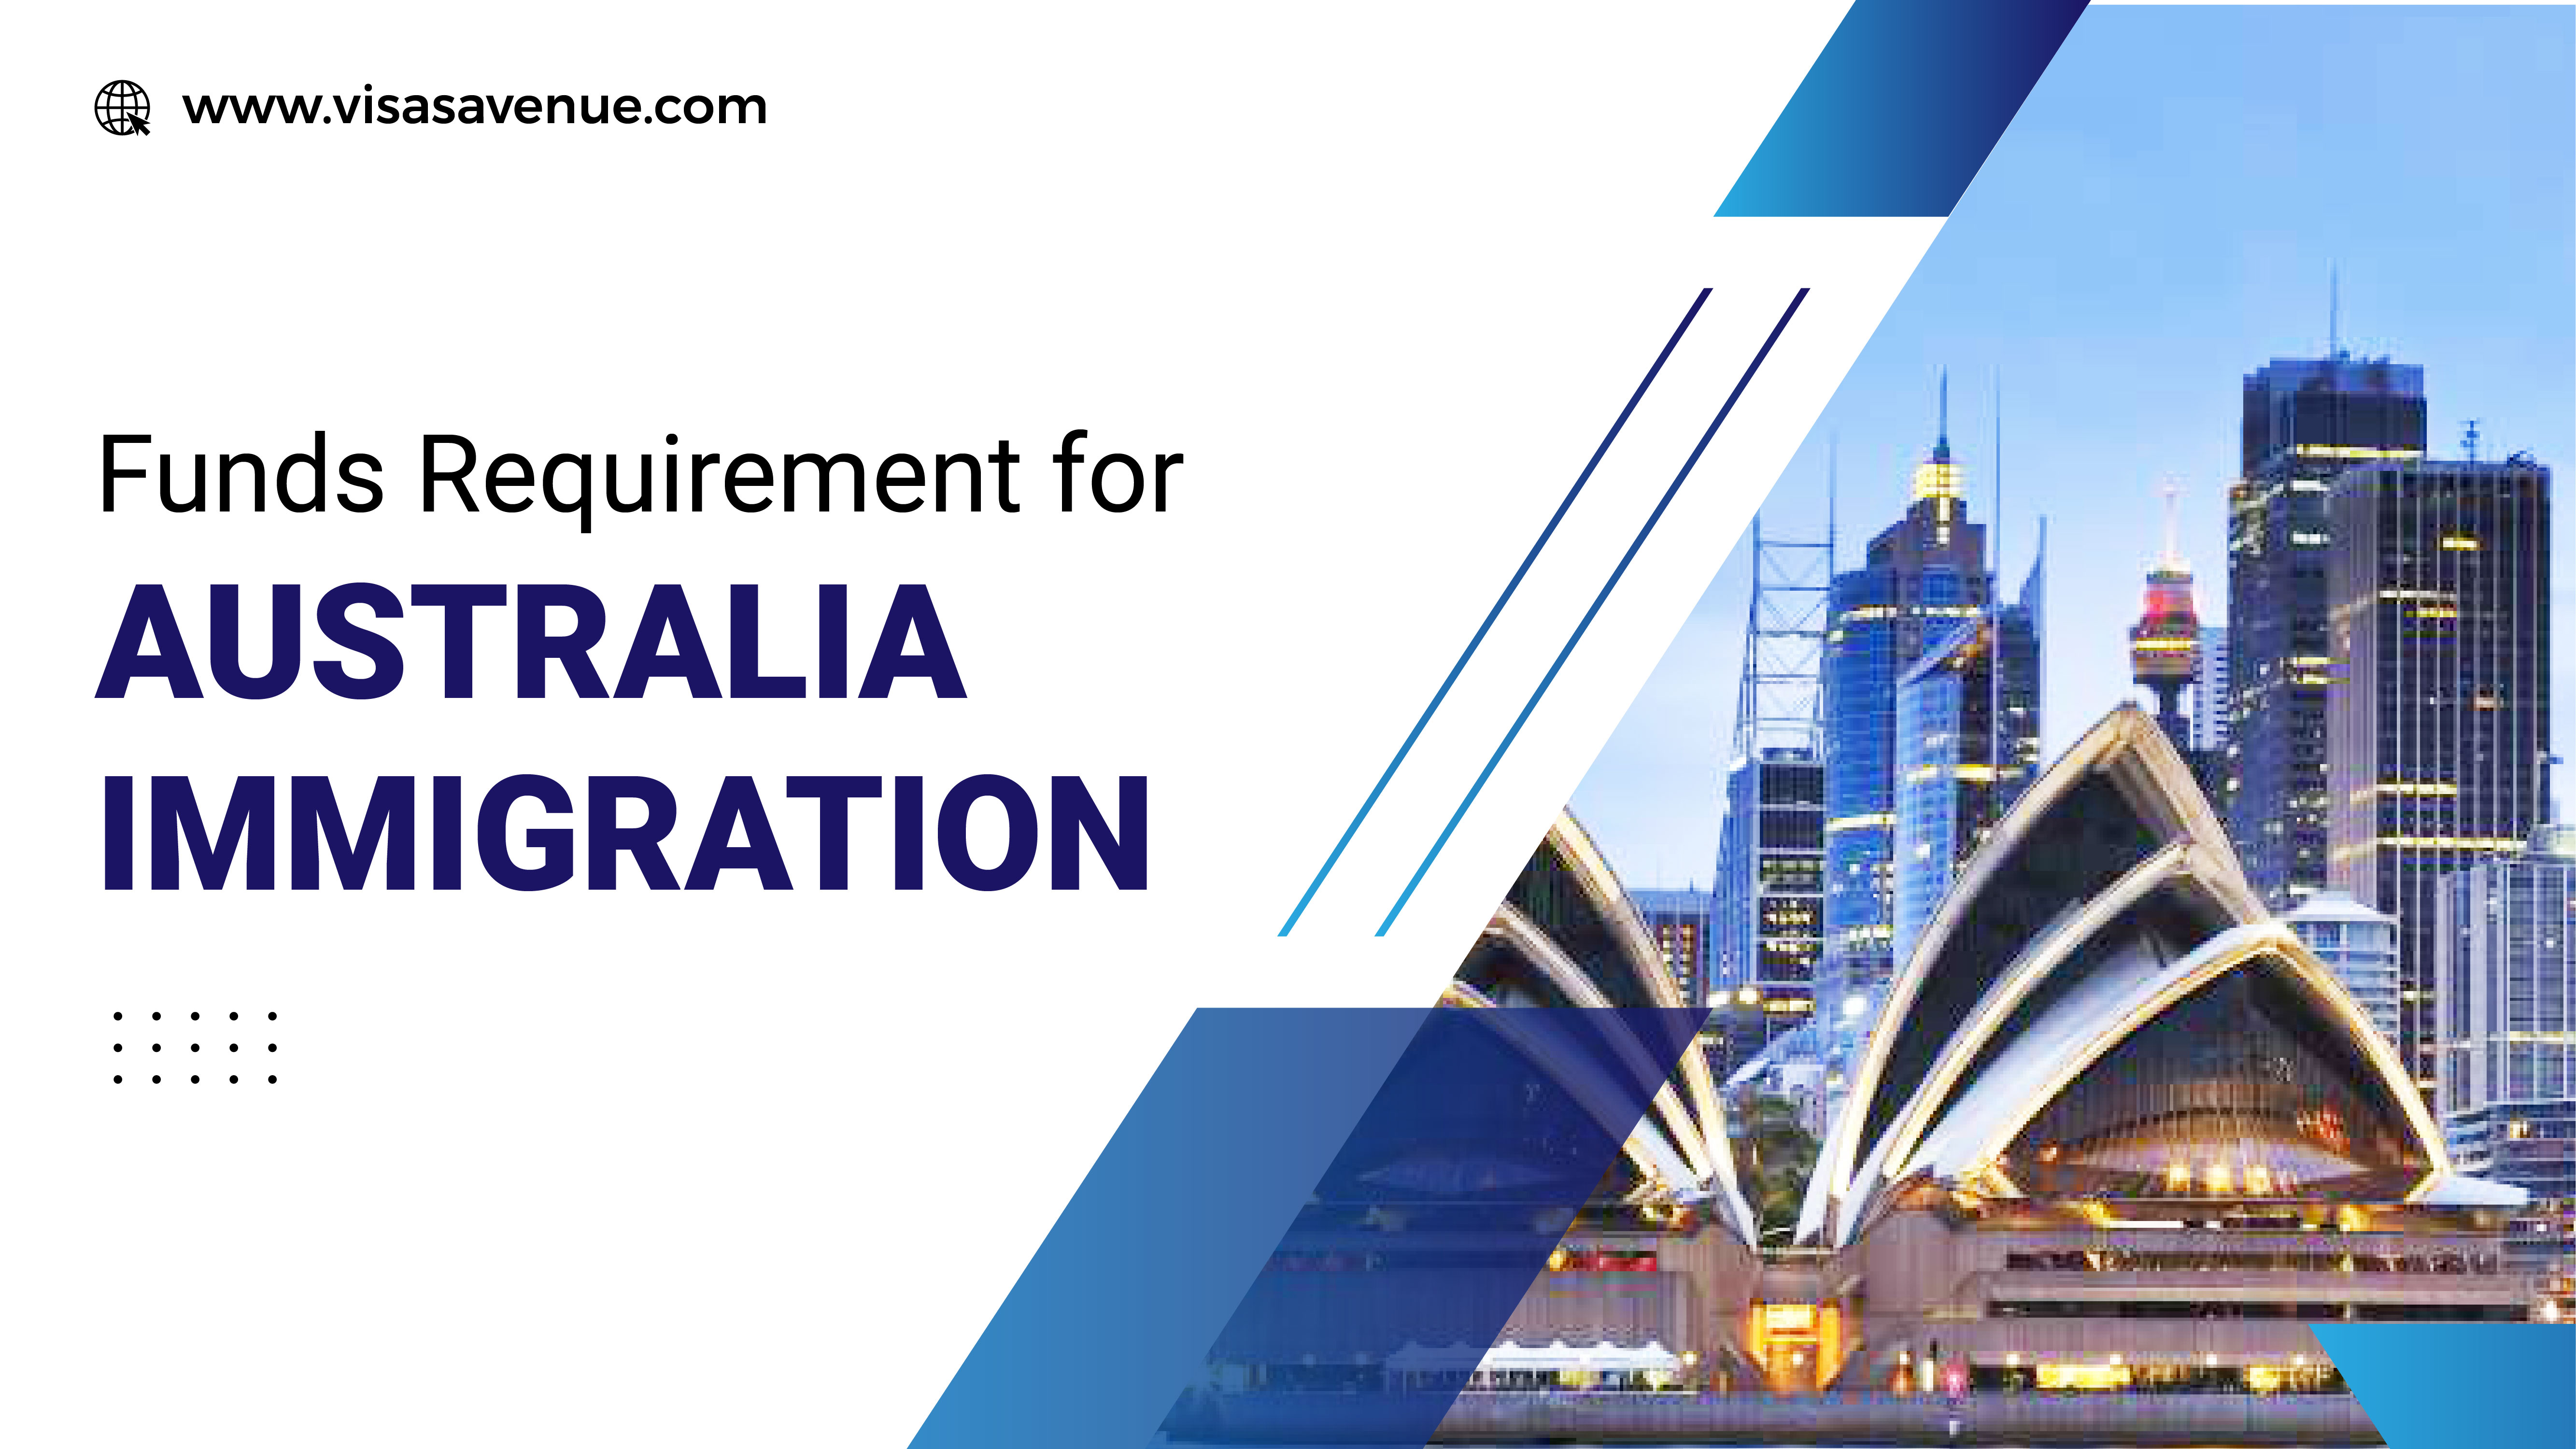 Funds Requirement for Australia Immigration